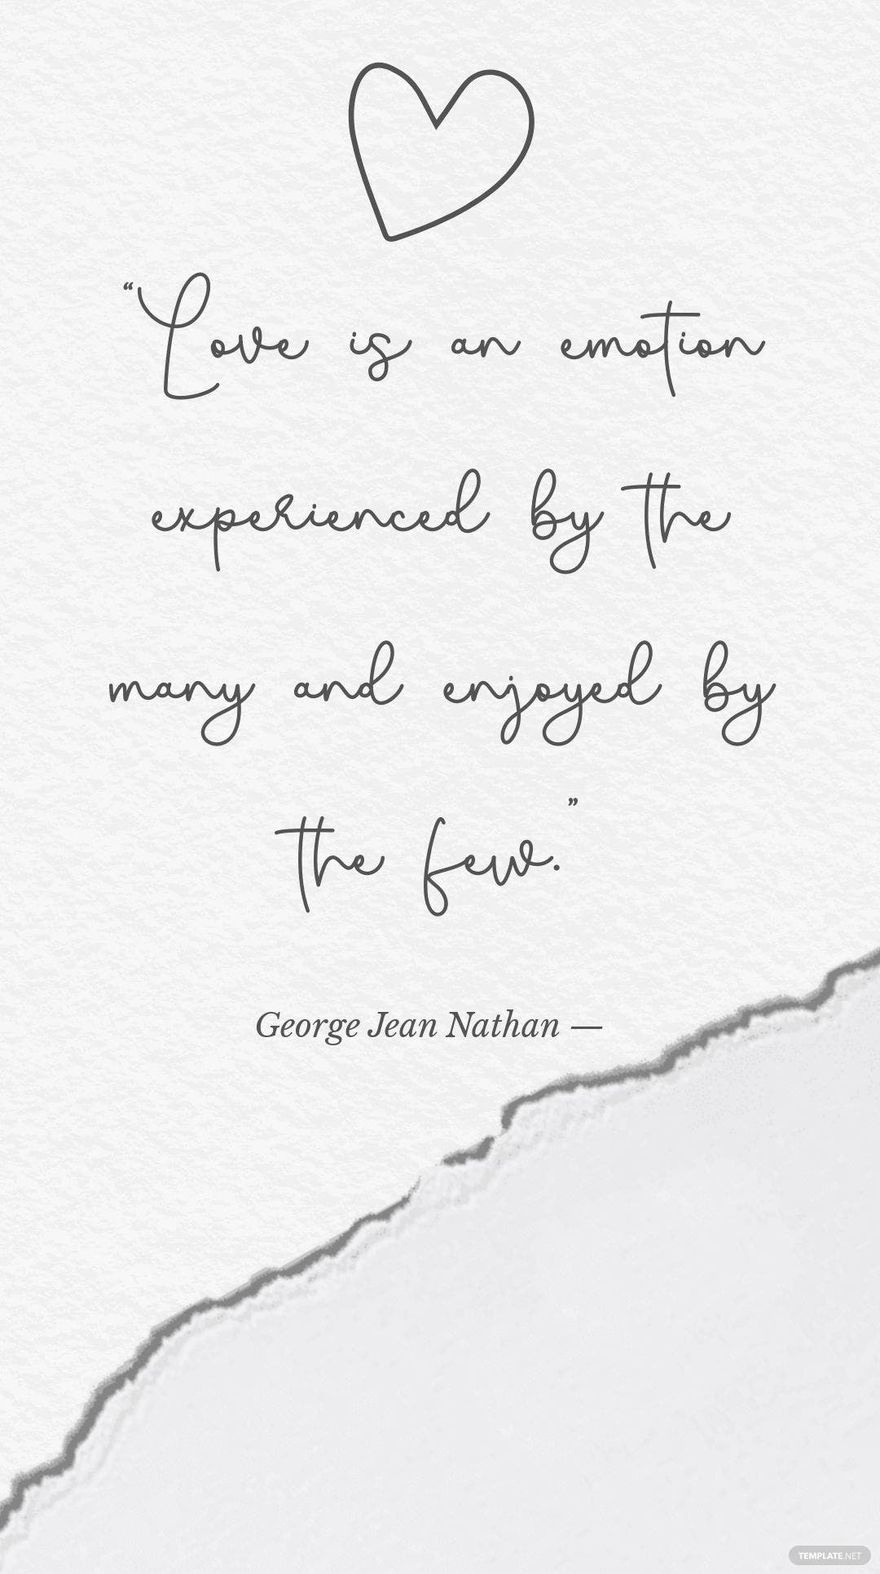 George Jean Nathan — “Love is an emotion experienced by the many and enjoyed by the few.”